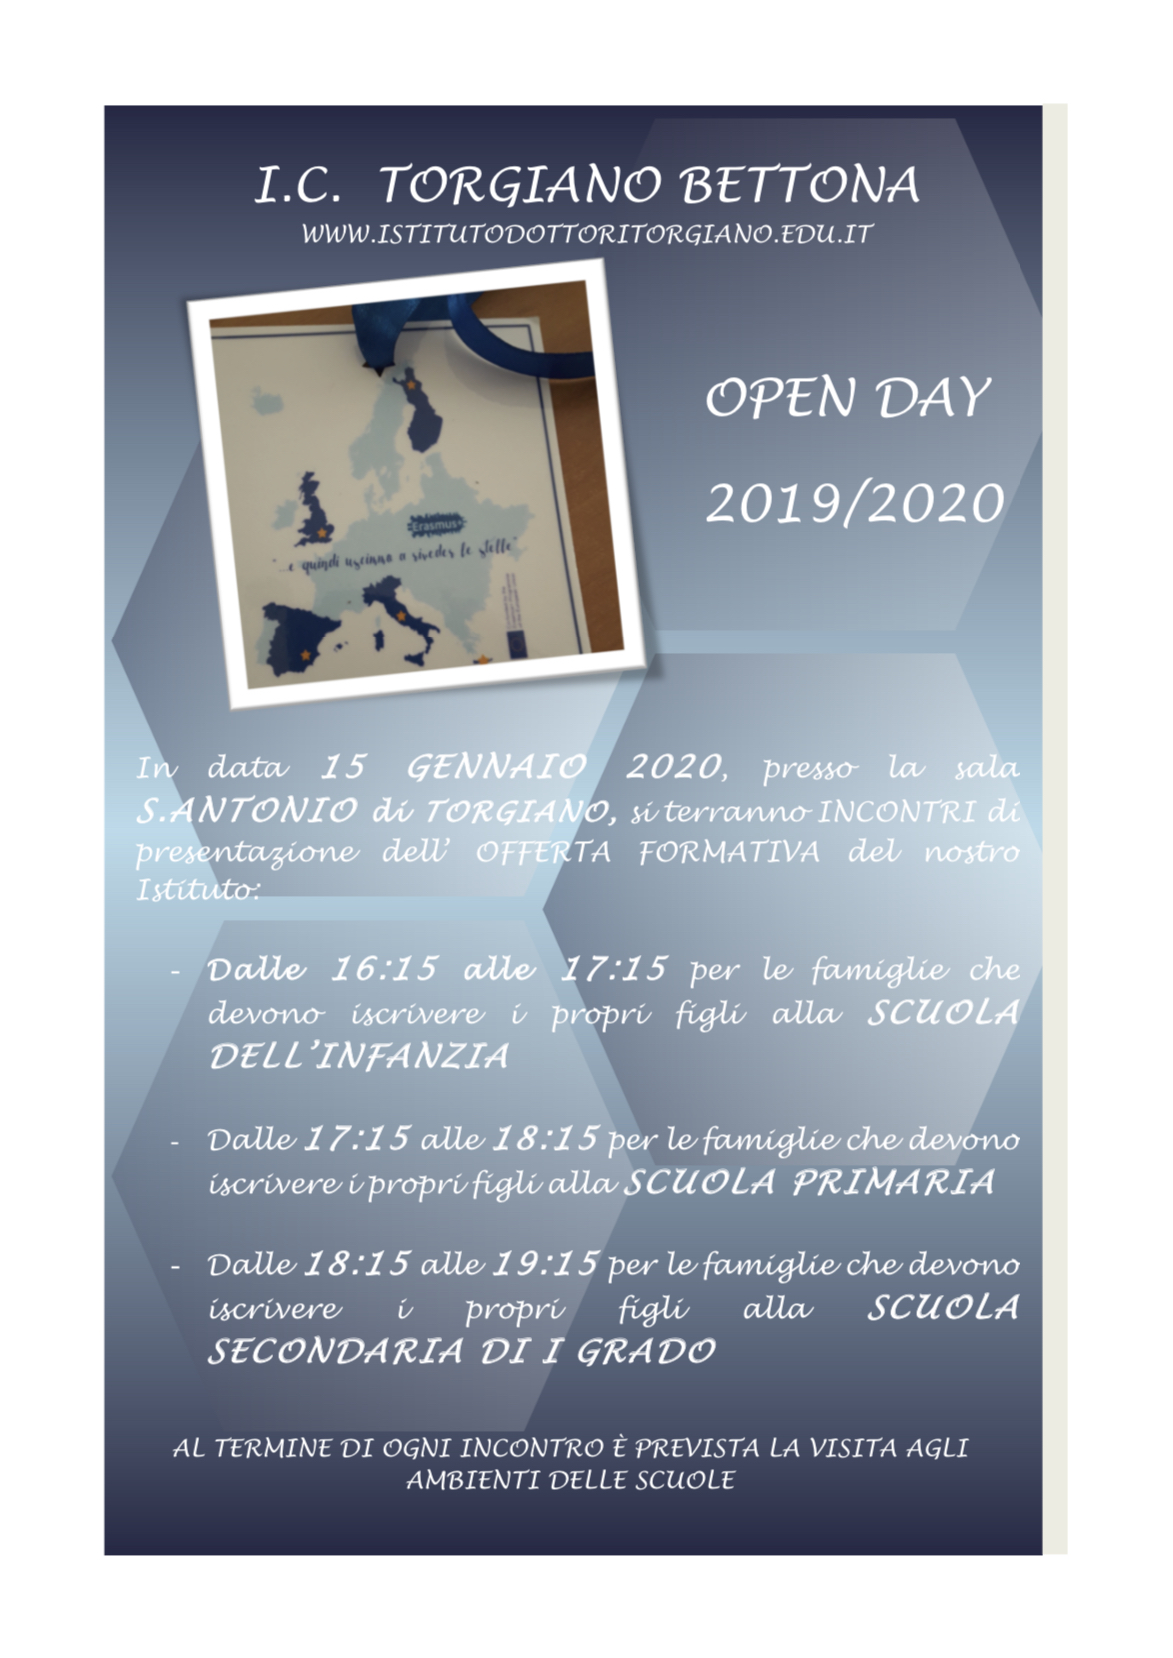 openday 2019-2020